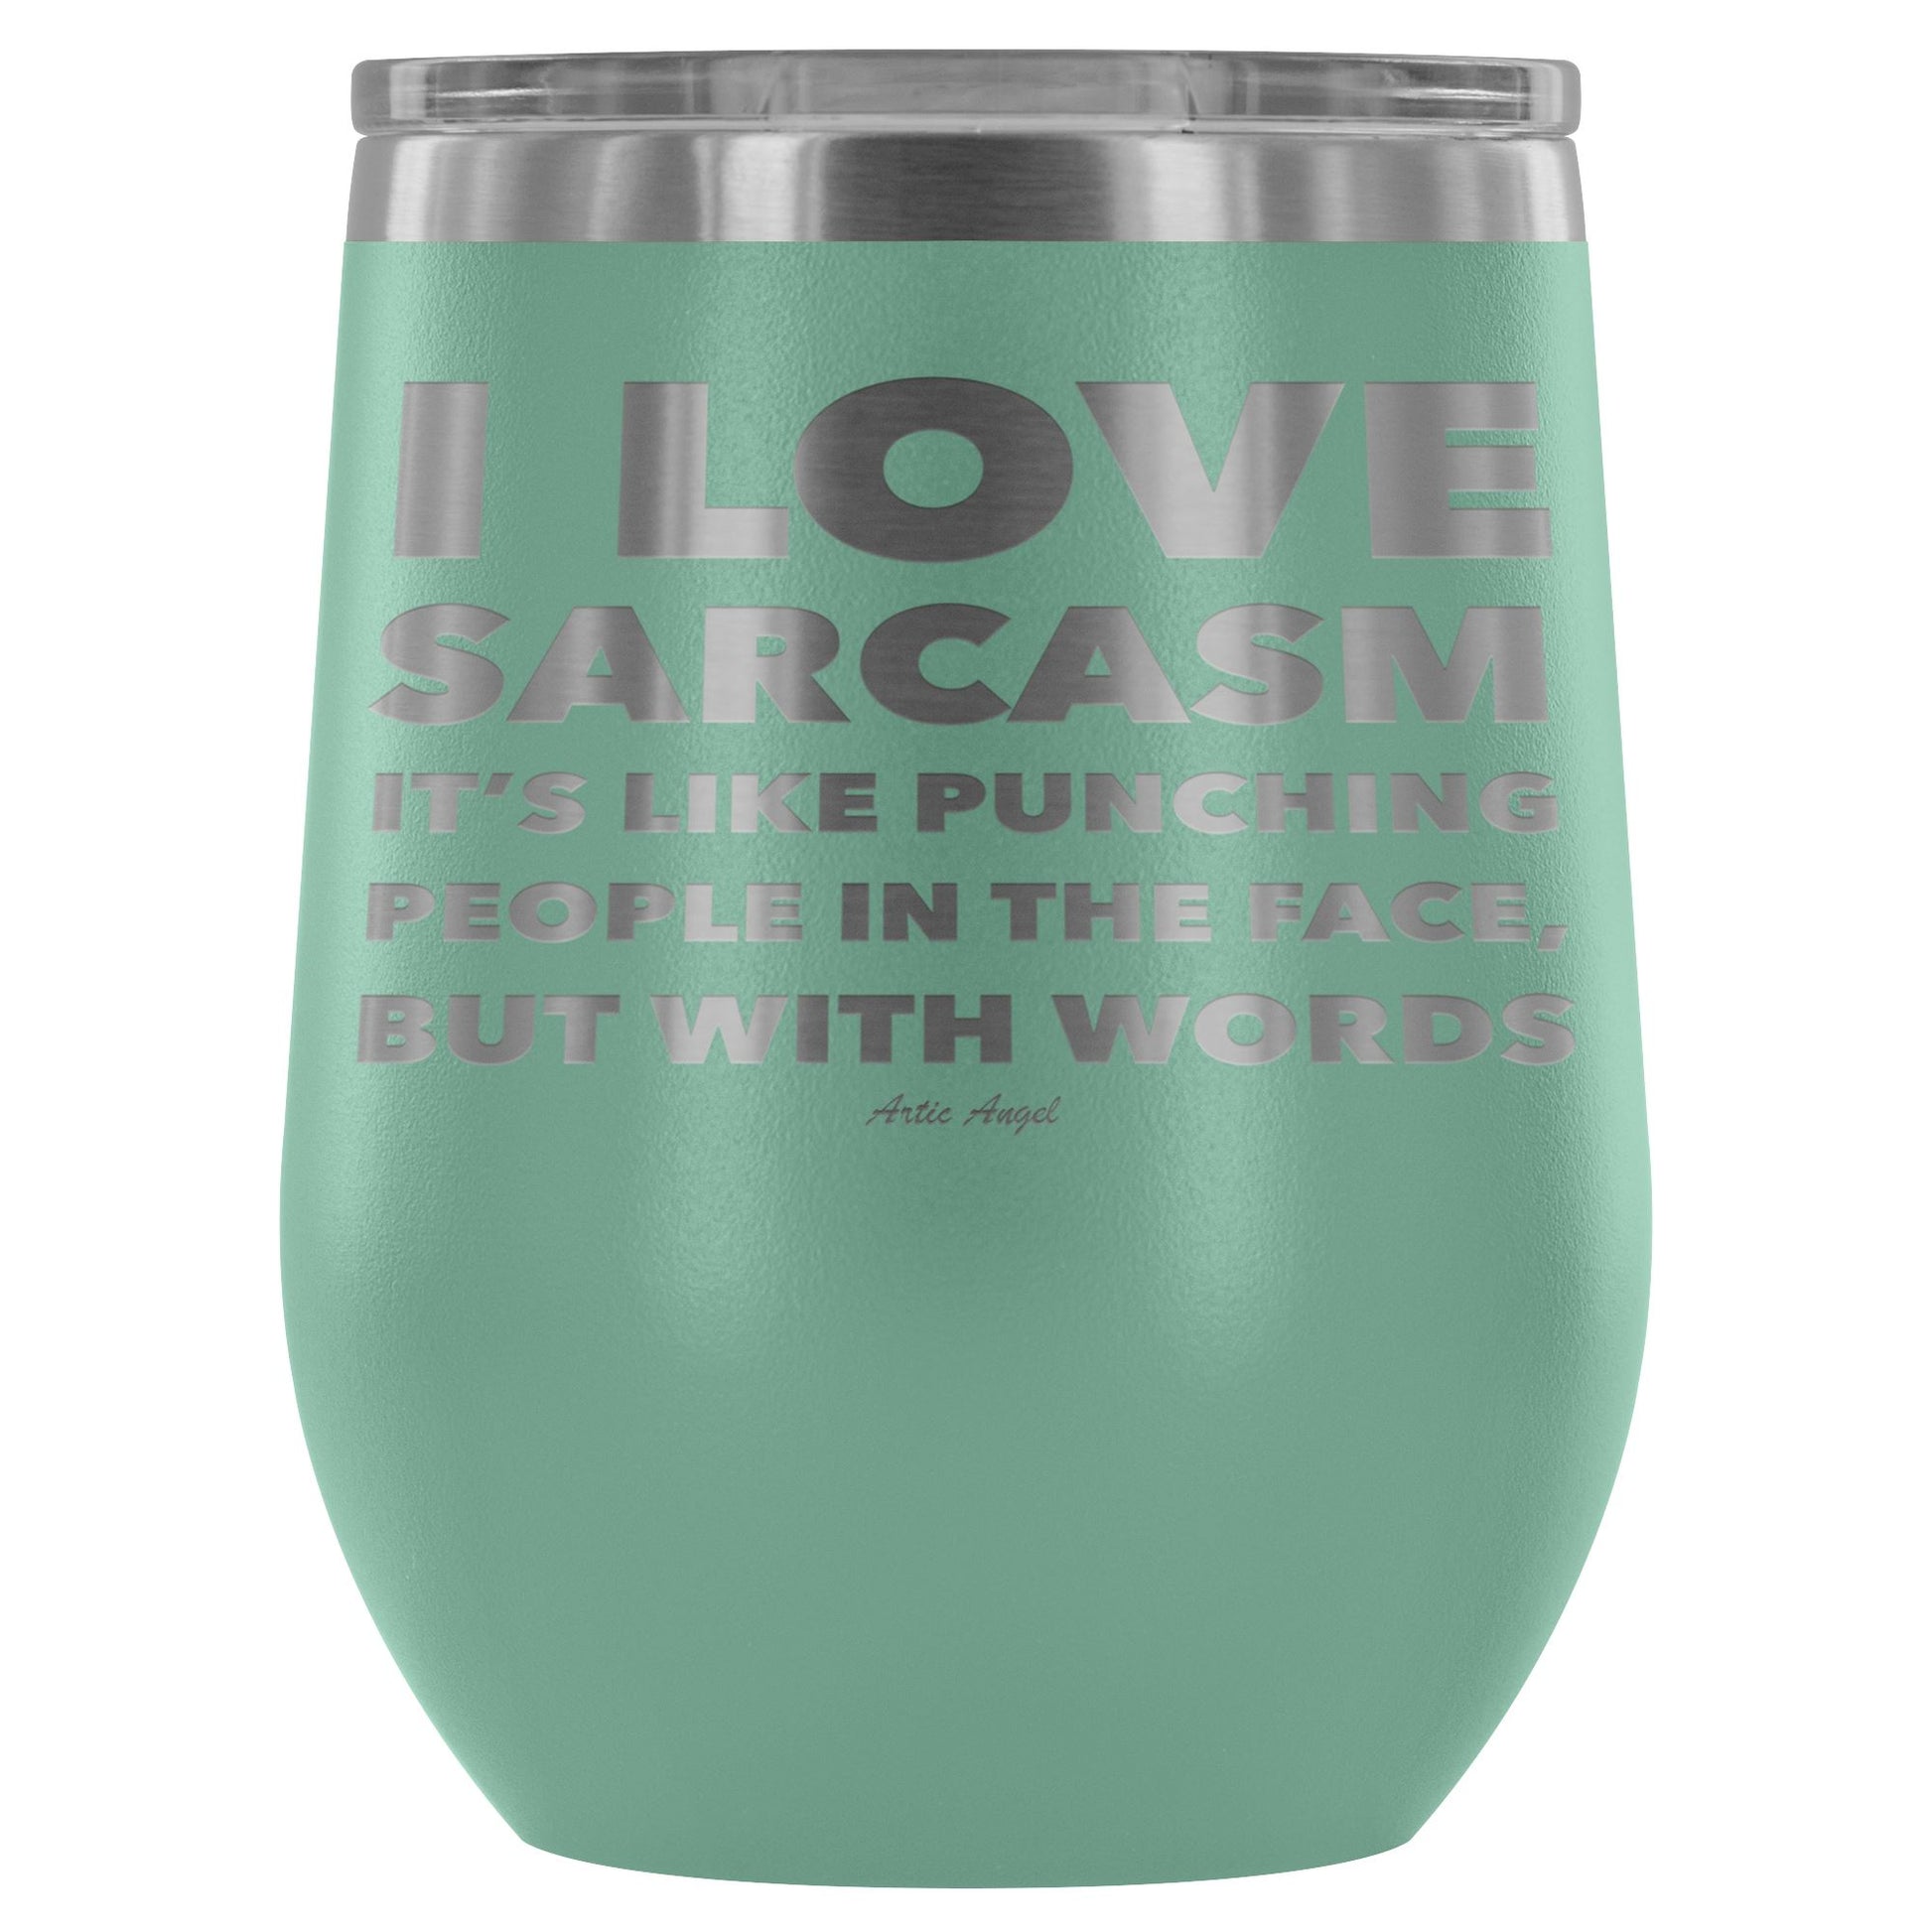 "I Love Sarcasm It's Like Punching People In The Face, But With Words" - Stemless Wine Cup Wine Tumbler Teal 